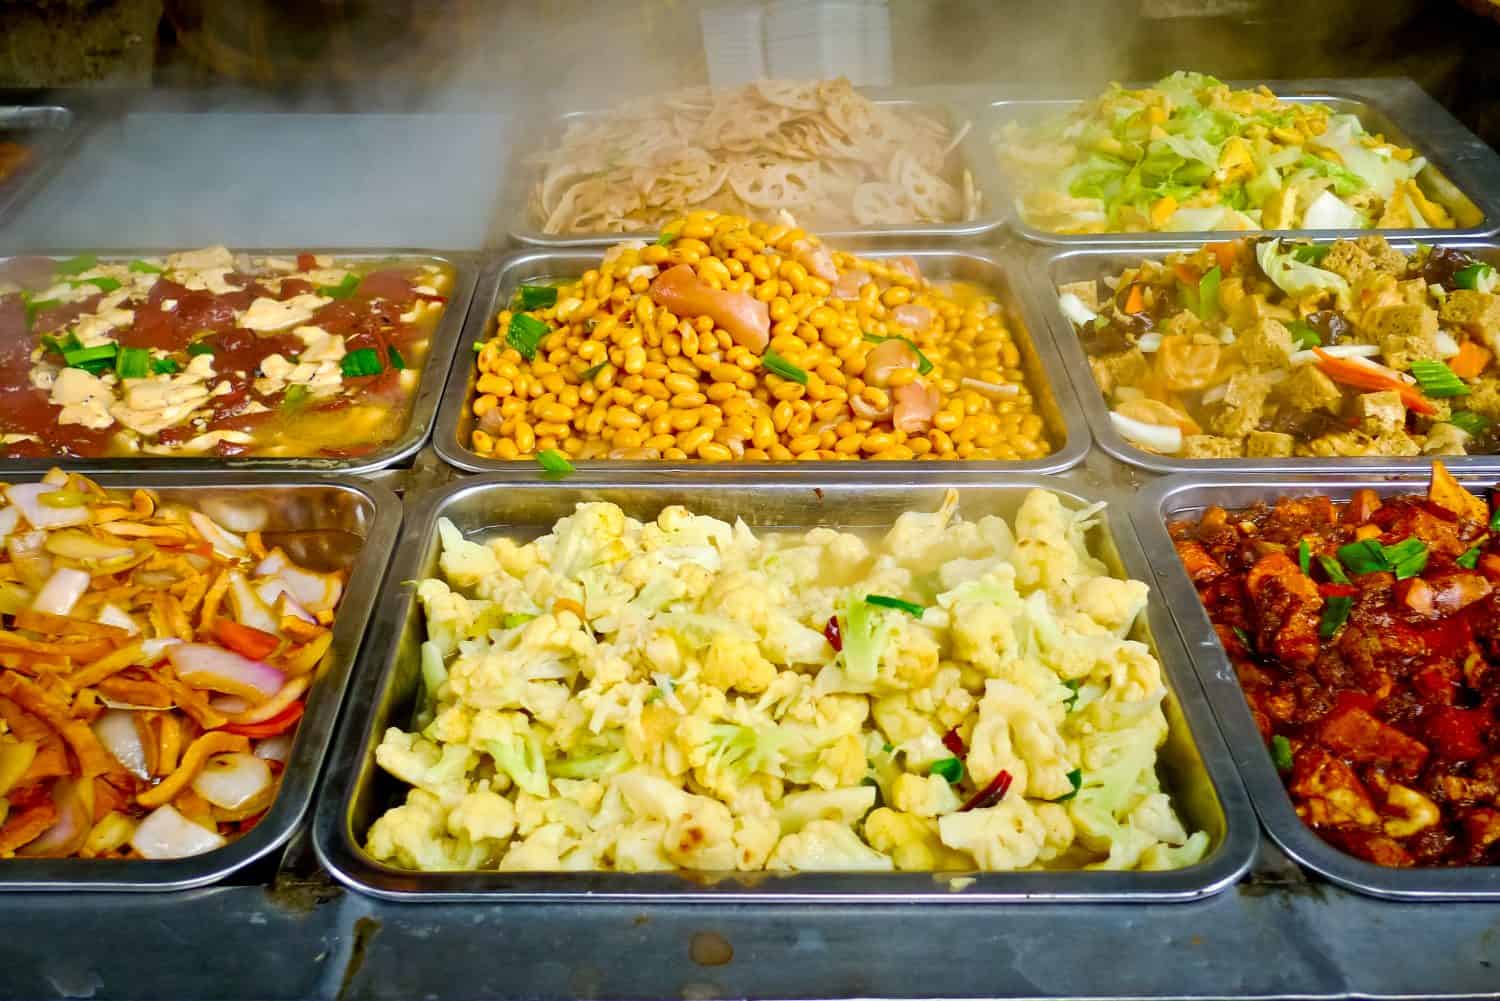 Buffet trays of chinese food in Shanghai, China